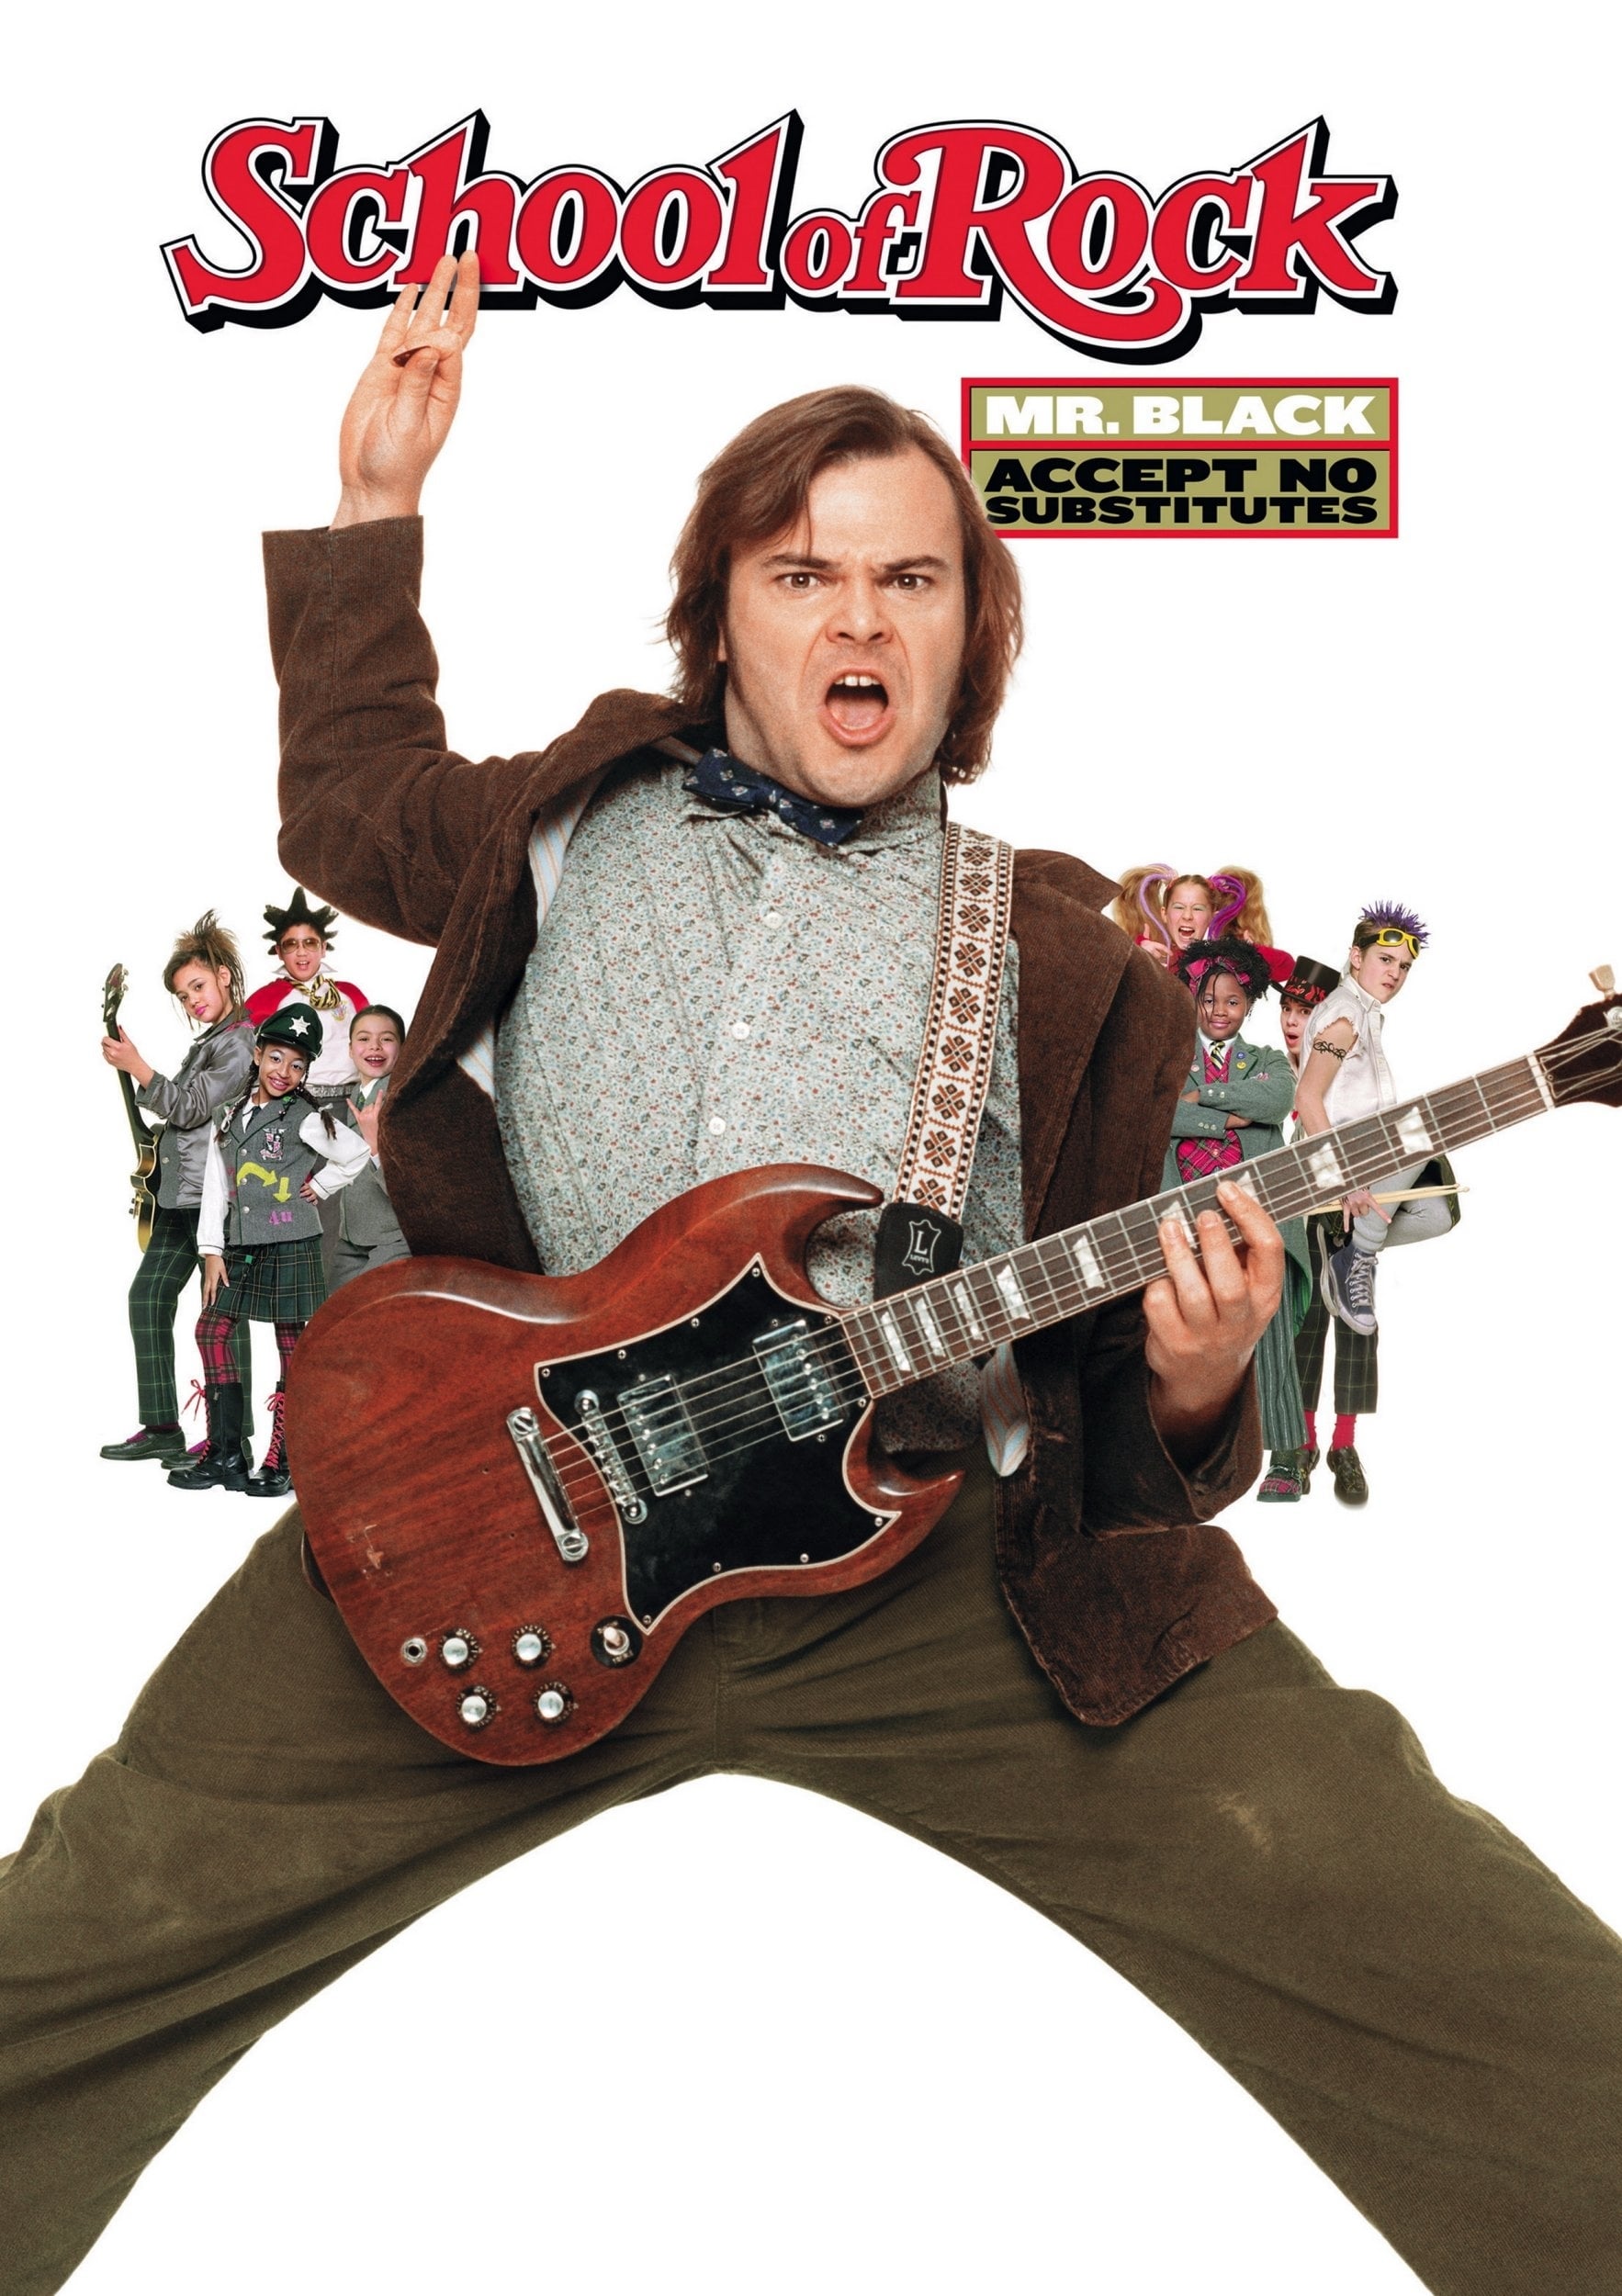 Movie poster for School Of Rock featuring Jack Black, guitar, and iconic Rolling Stone magazine font spelling out movie title